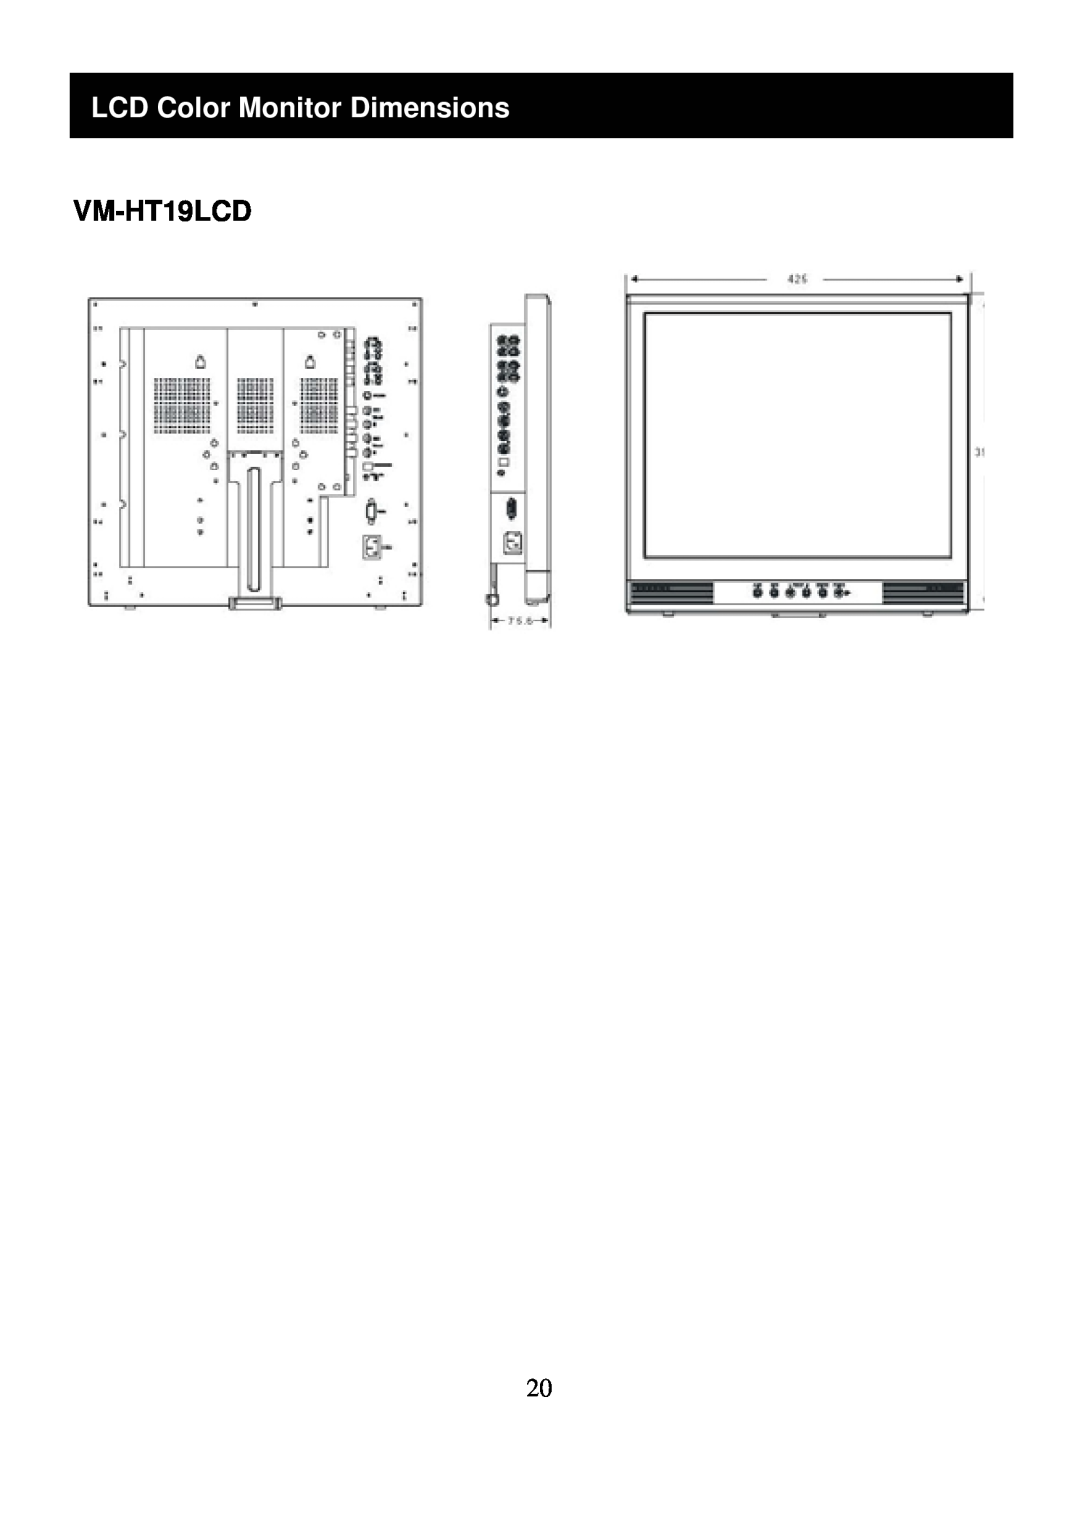 Speco Technologies VM-HT19LCD user manual LCD Color Monitor Dimensions 